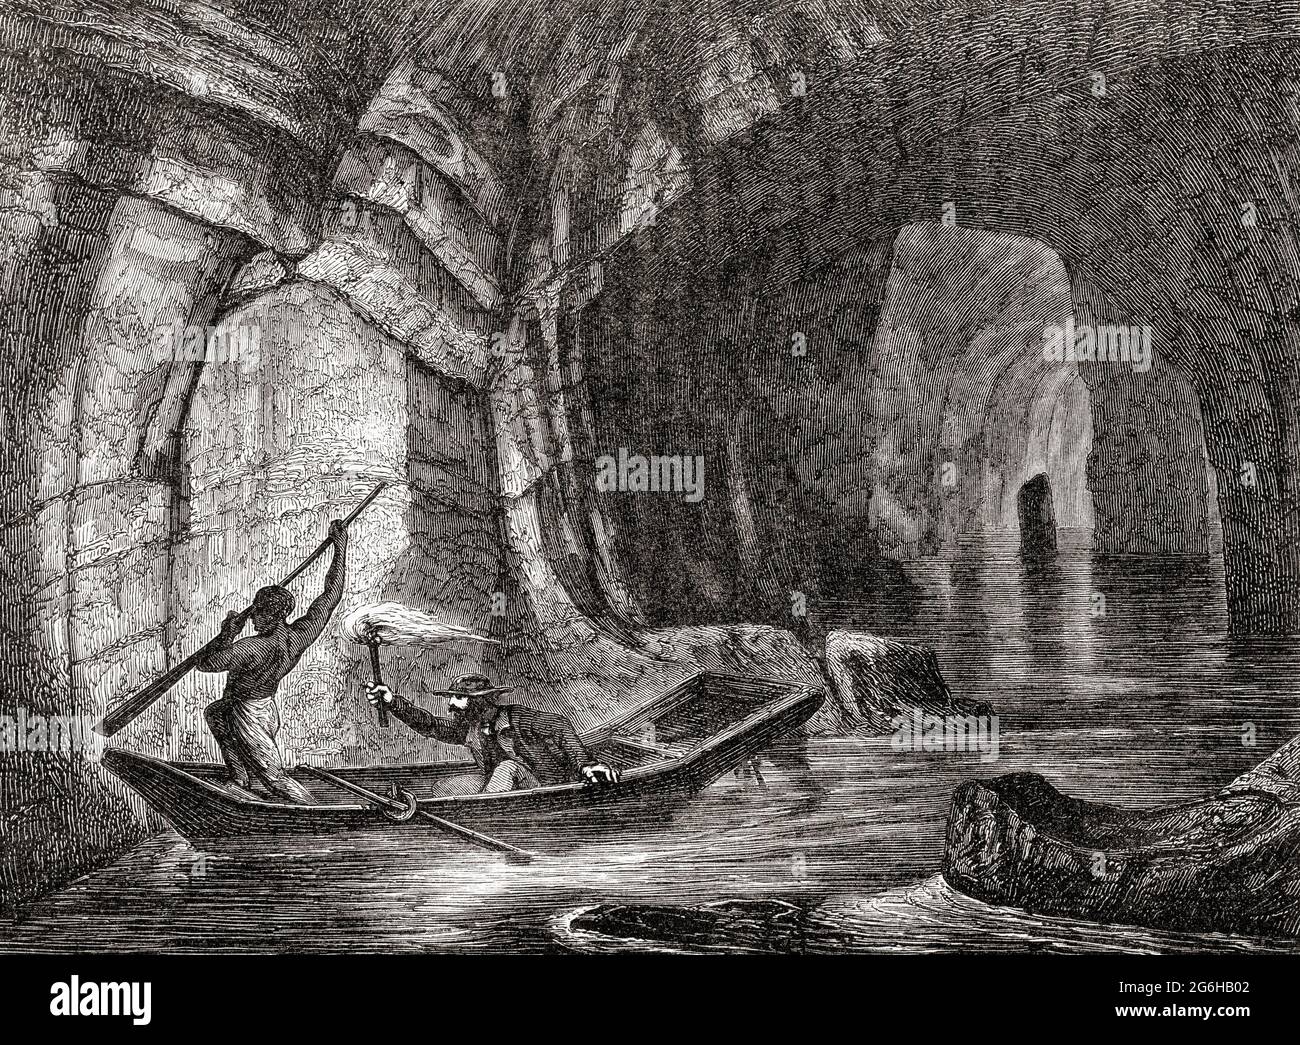 Exploring the Styx, a subterranean river in the Mammoth Cave National Park, west-central Kentucky, United States of America, seen here in the 19th century.  The longest cave system known in the world, this is now an UNESCO World Heritage Site.  From The Universe or, The Infinitely Great and the Infinitely Little, published 1882. Stock Photo